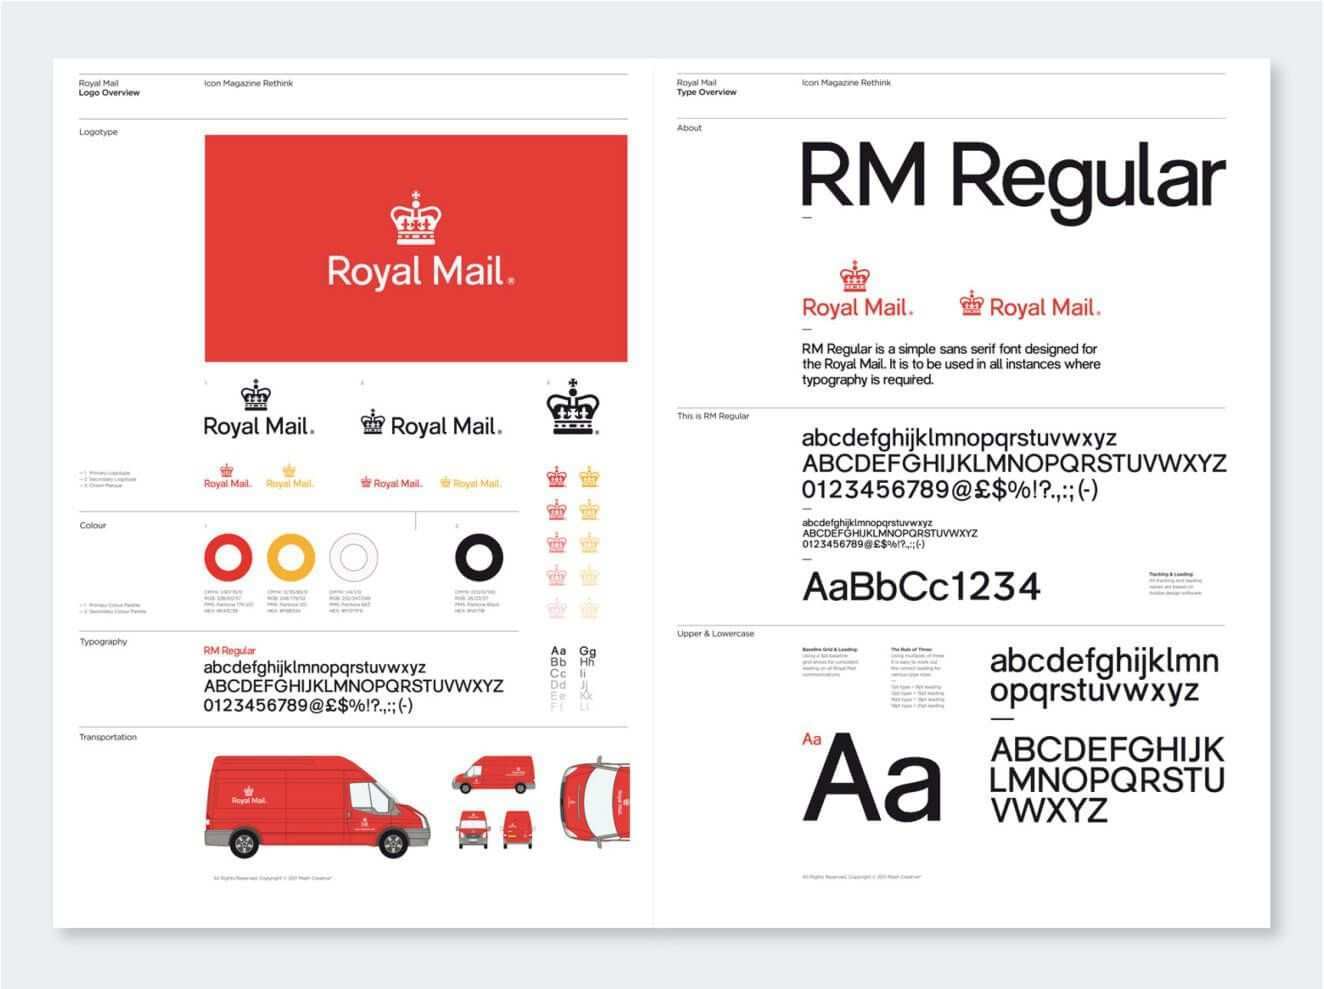 Royal Mail Style Guide Jpg 1 324 989 Pixels